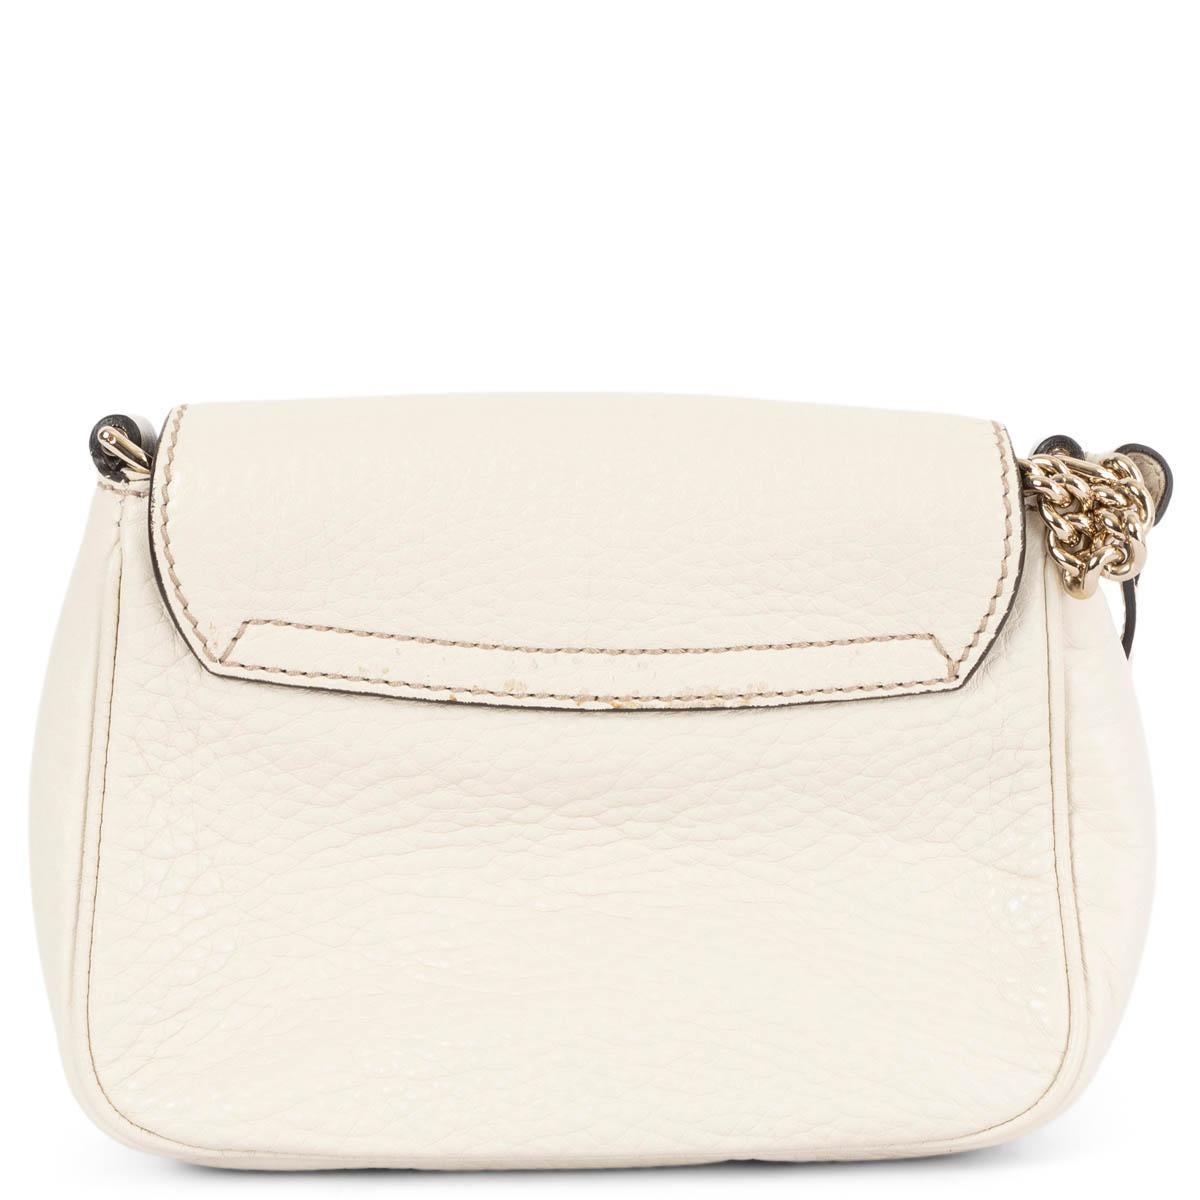 Beige GUCCI ivory leather SMALL SOHO FLAP Shoulder Bag For Sale